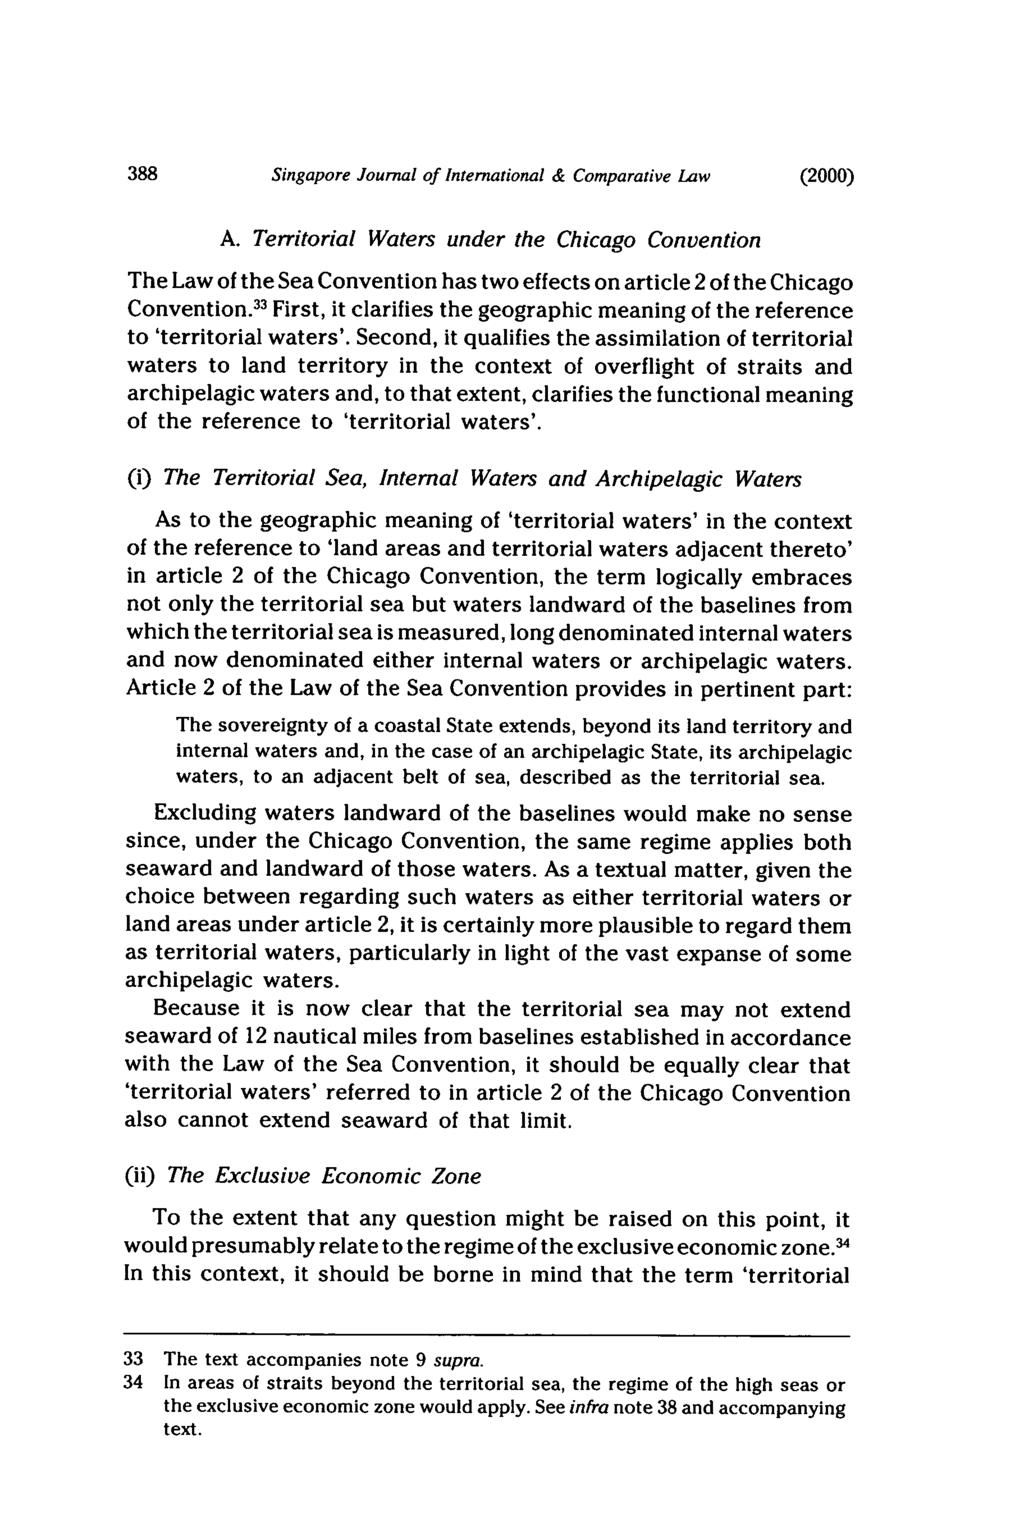 (2000) A. Territorial Waters under the Chicago Convention The Law of the Sea Convention has two effects on article 2 of the Chicago Convention.